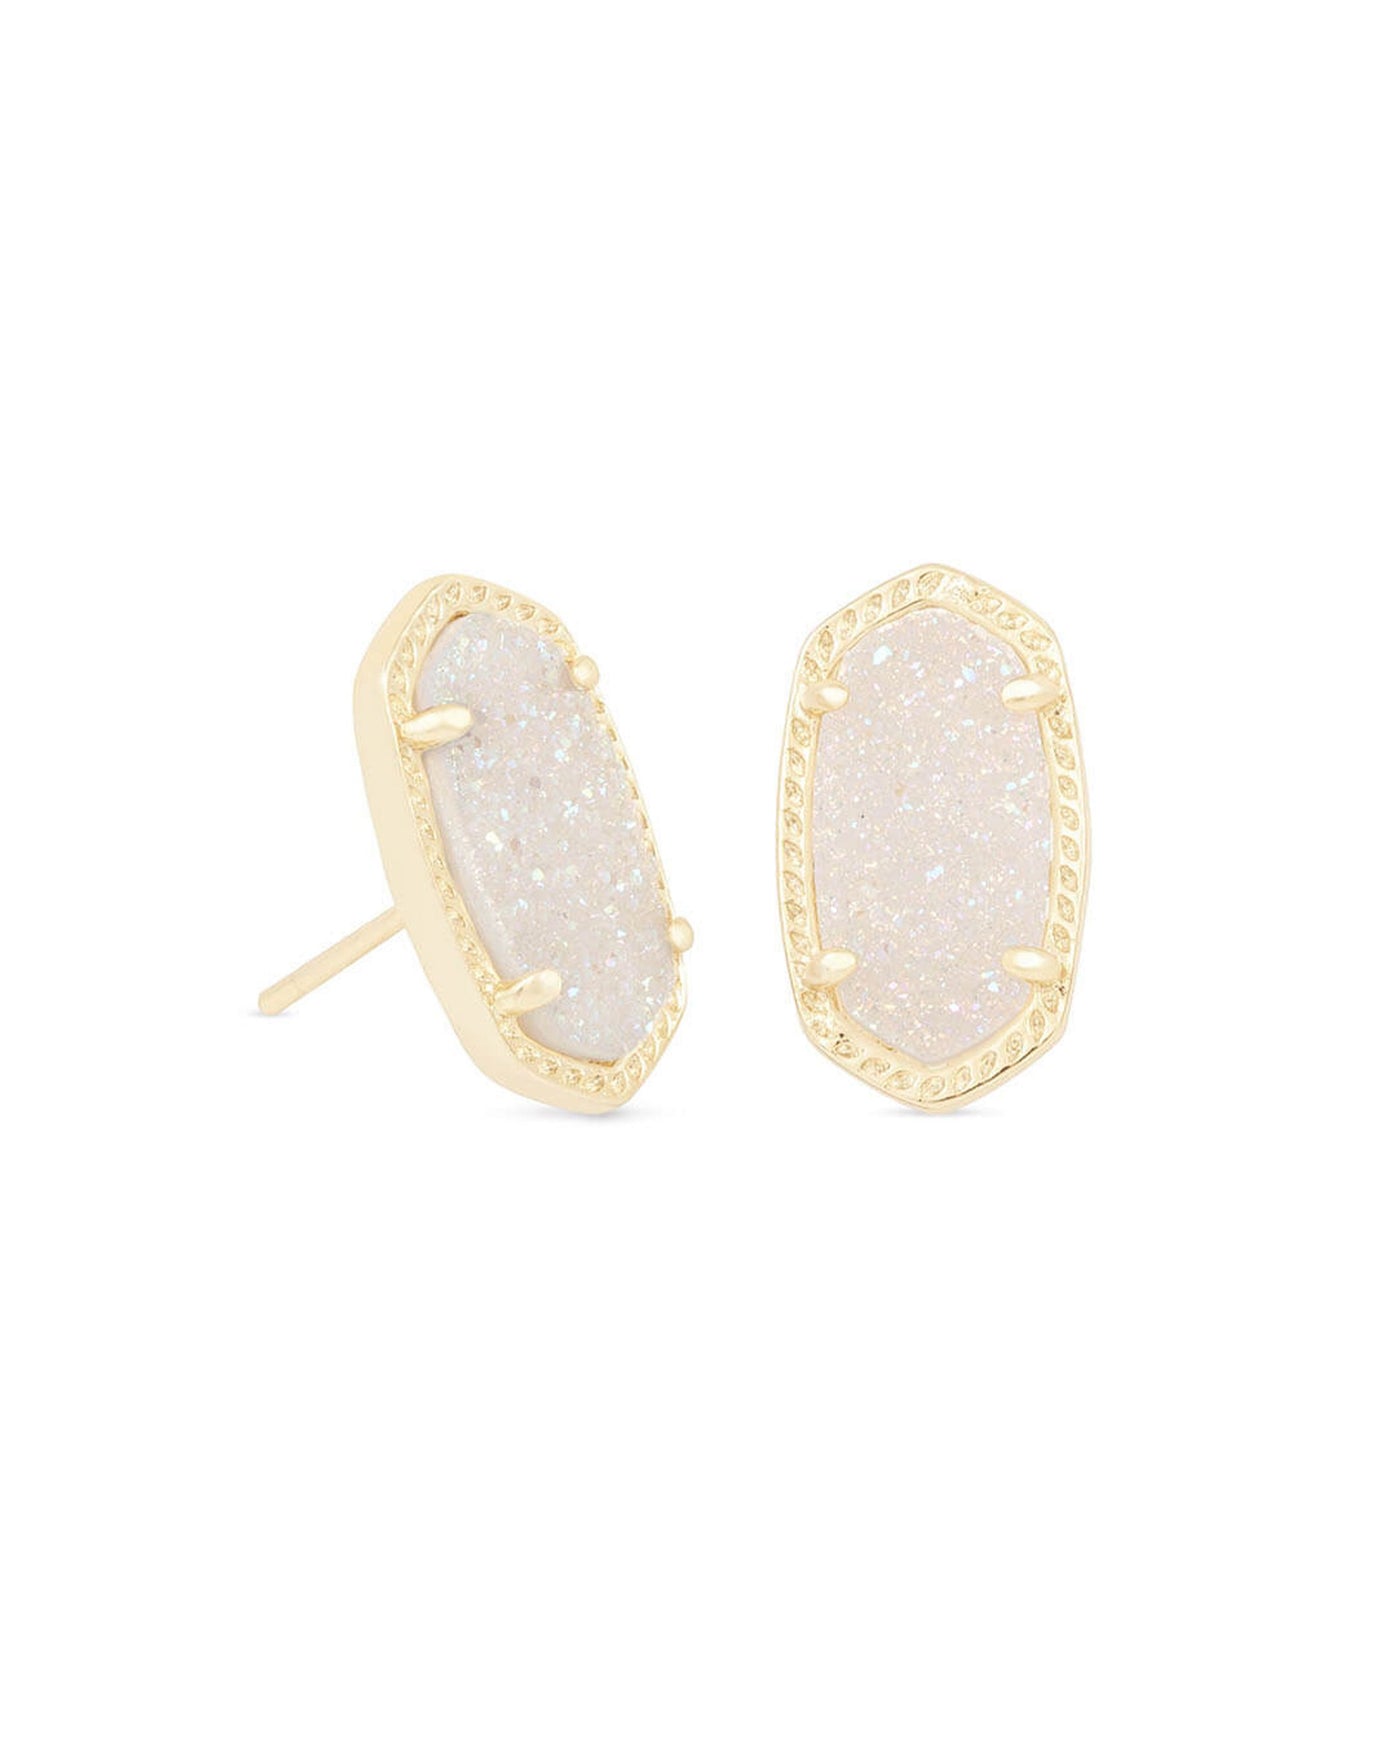 Ellie Stud Earrings Gold Iridescent Drusy on white background, front view.